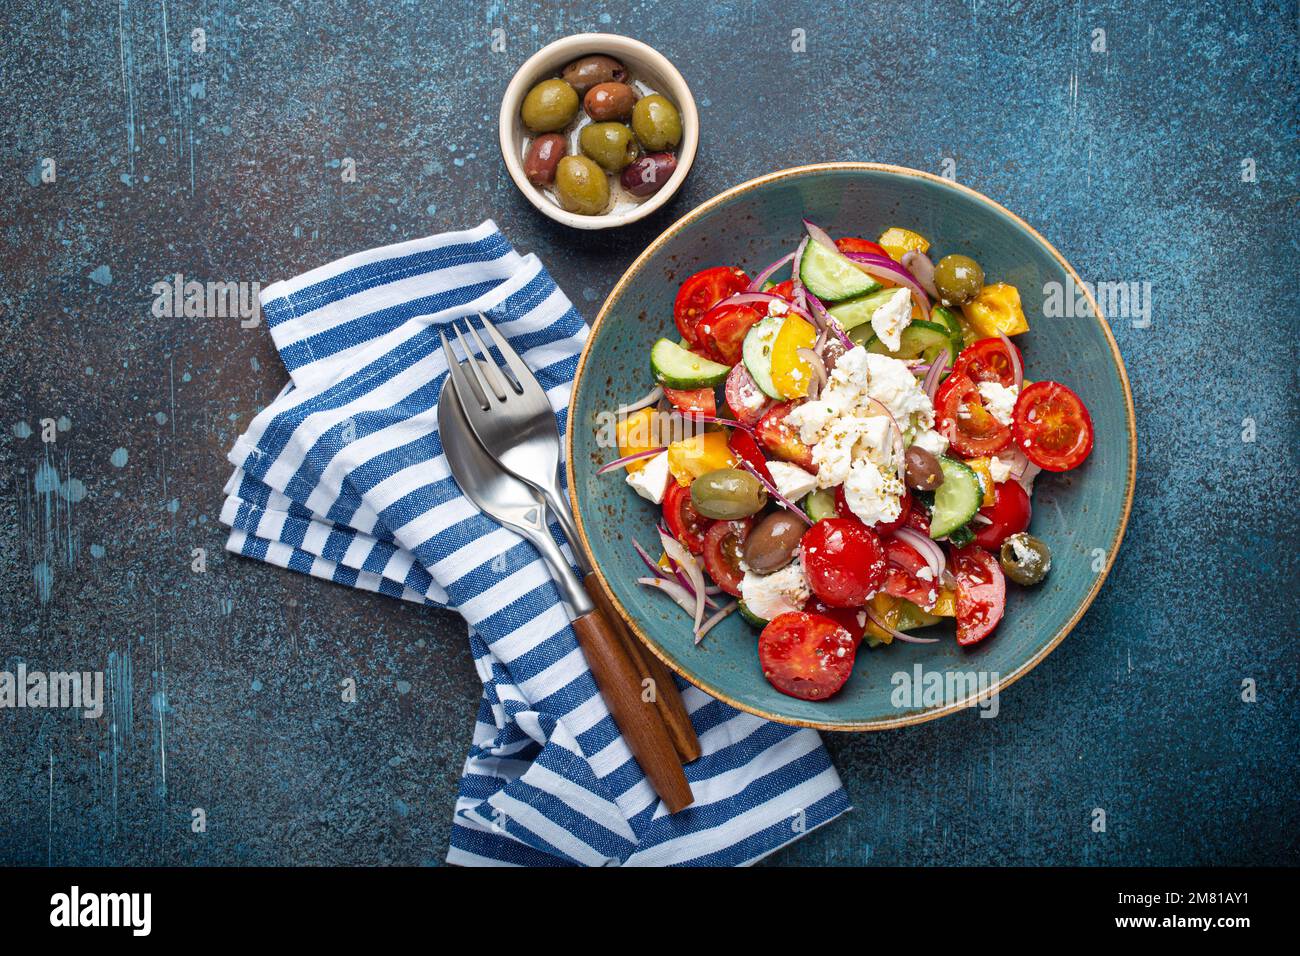 Greek salad with feta cheese, vegetables, olives in blue bowl on concrete background Stock Photo